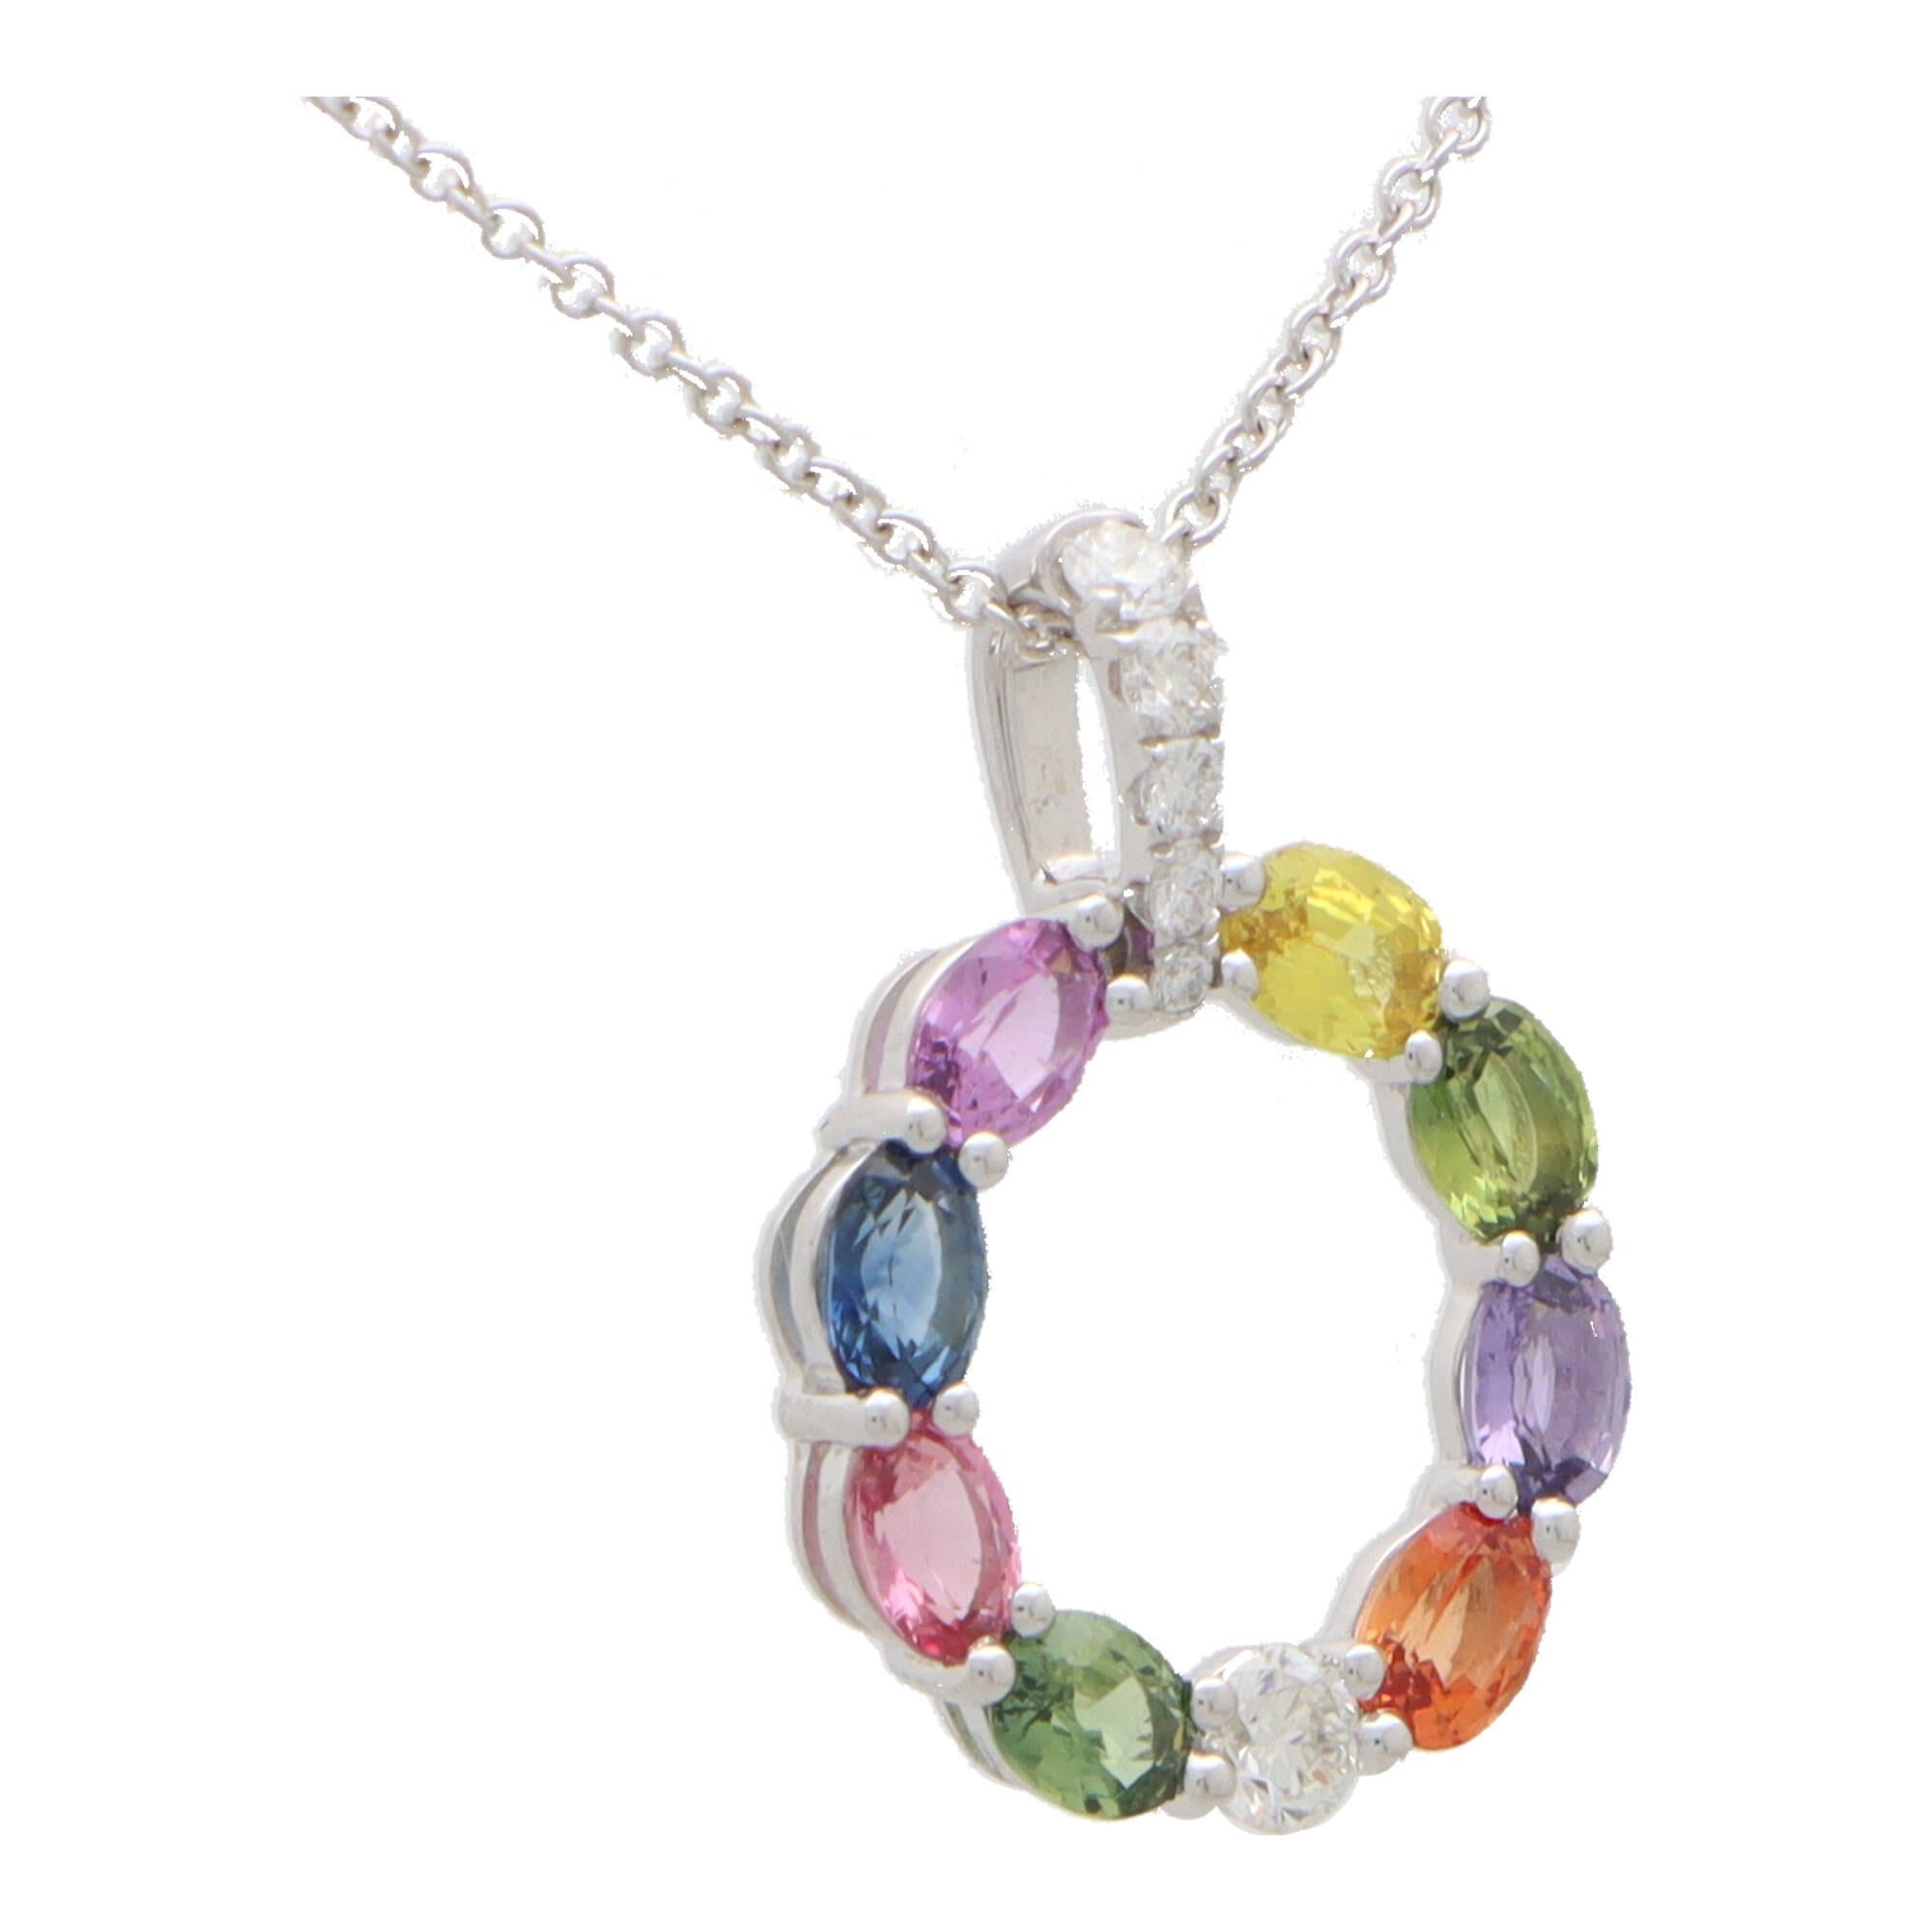 A stylish rainbow sapphire and diamond pendant necklace set in 18k white gold.

The pendant is composed in a white gold hoop and is set throughout with oval cut rainbow sapphires; all of which perfectly complement each other. The hoop elegantly